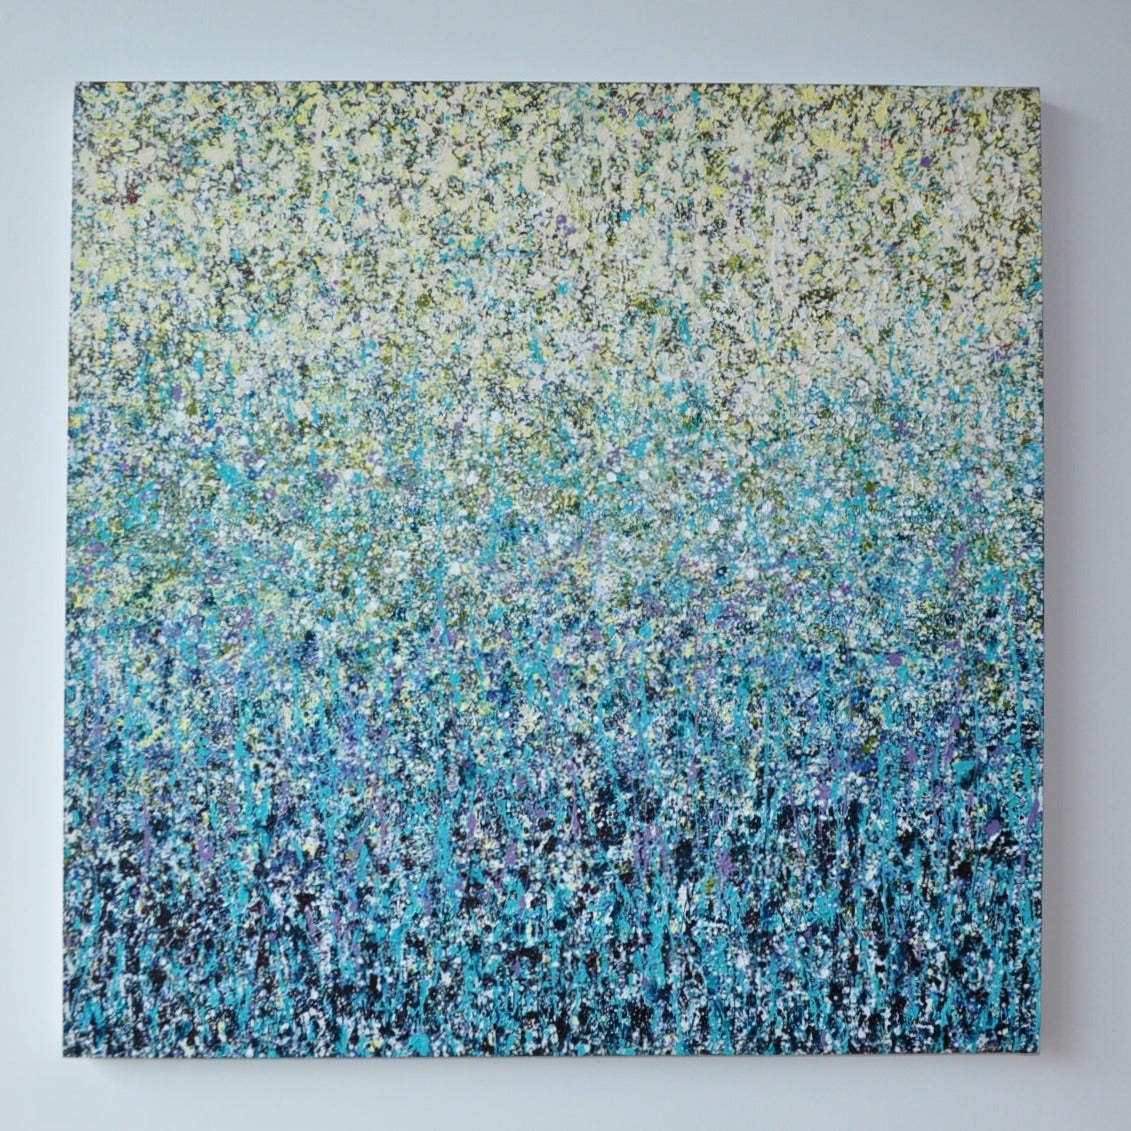 Abstract expressionist painting that is beautifully executed in several layers of turquoise, olive, dark blue and white. 40